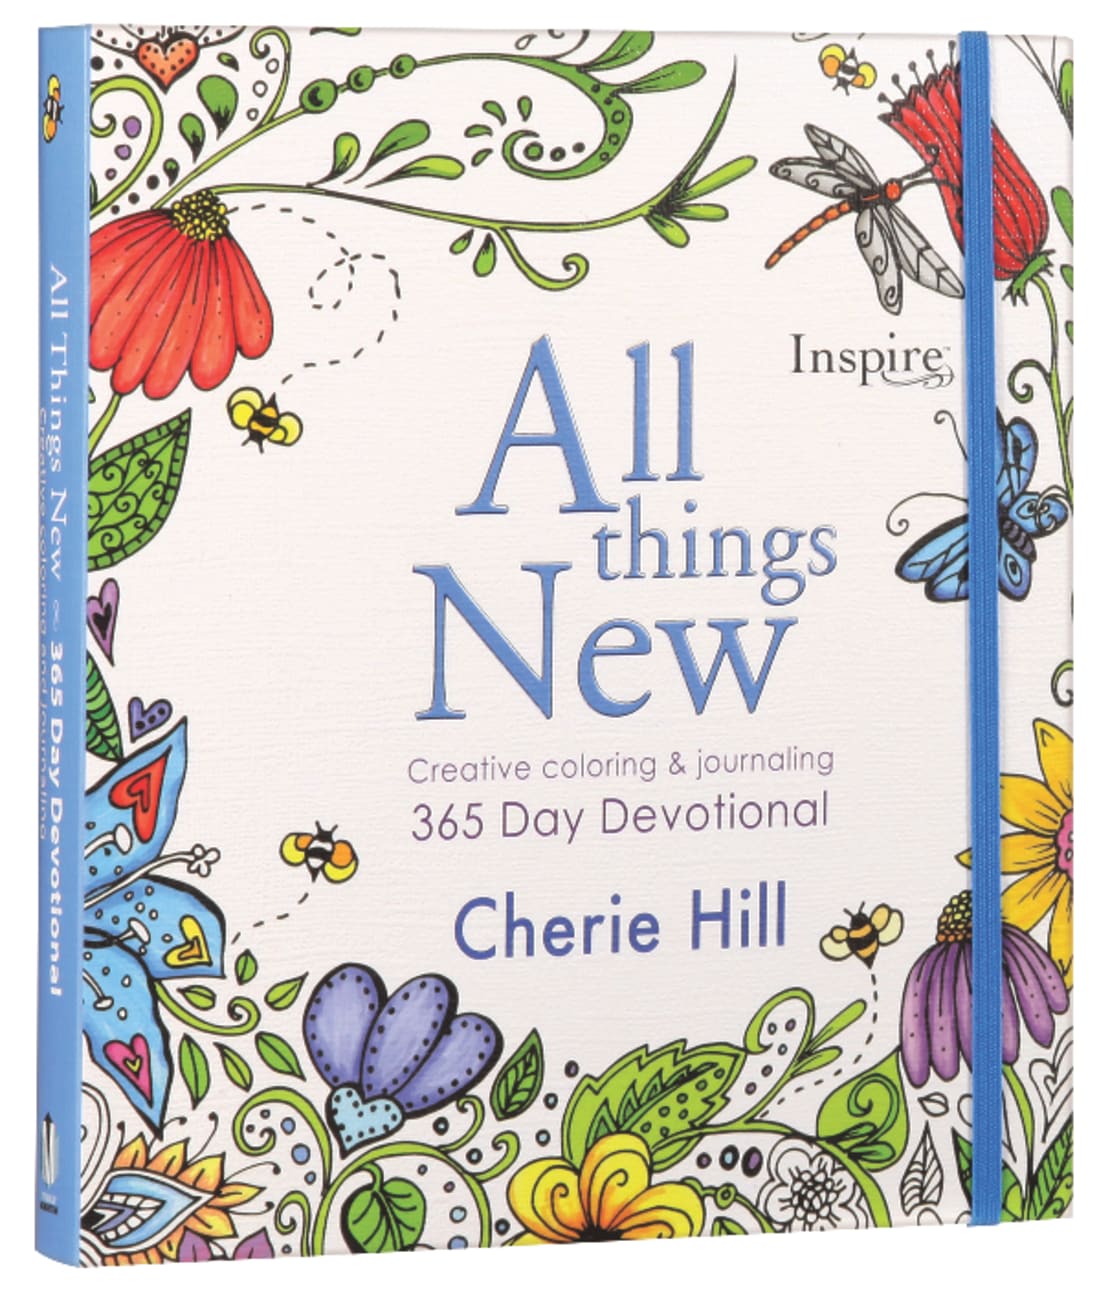 Inspire: All Things New - Creative Coloring & Journaling 365 Day Devotional Paperback